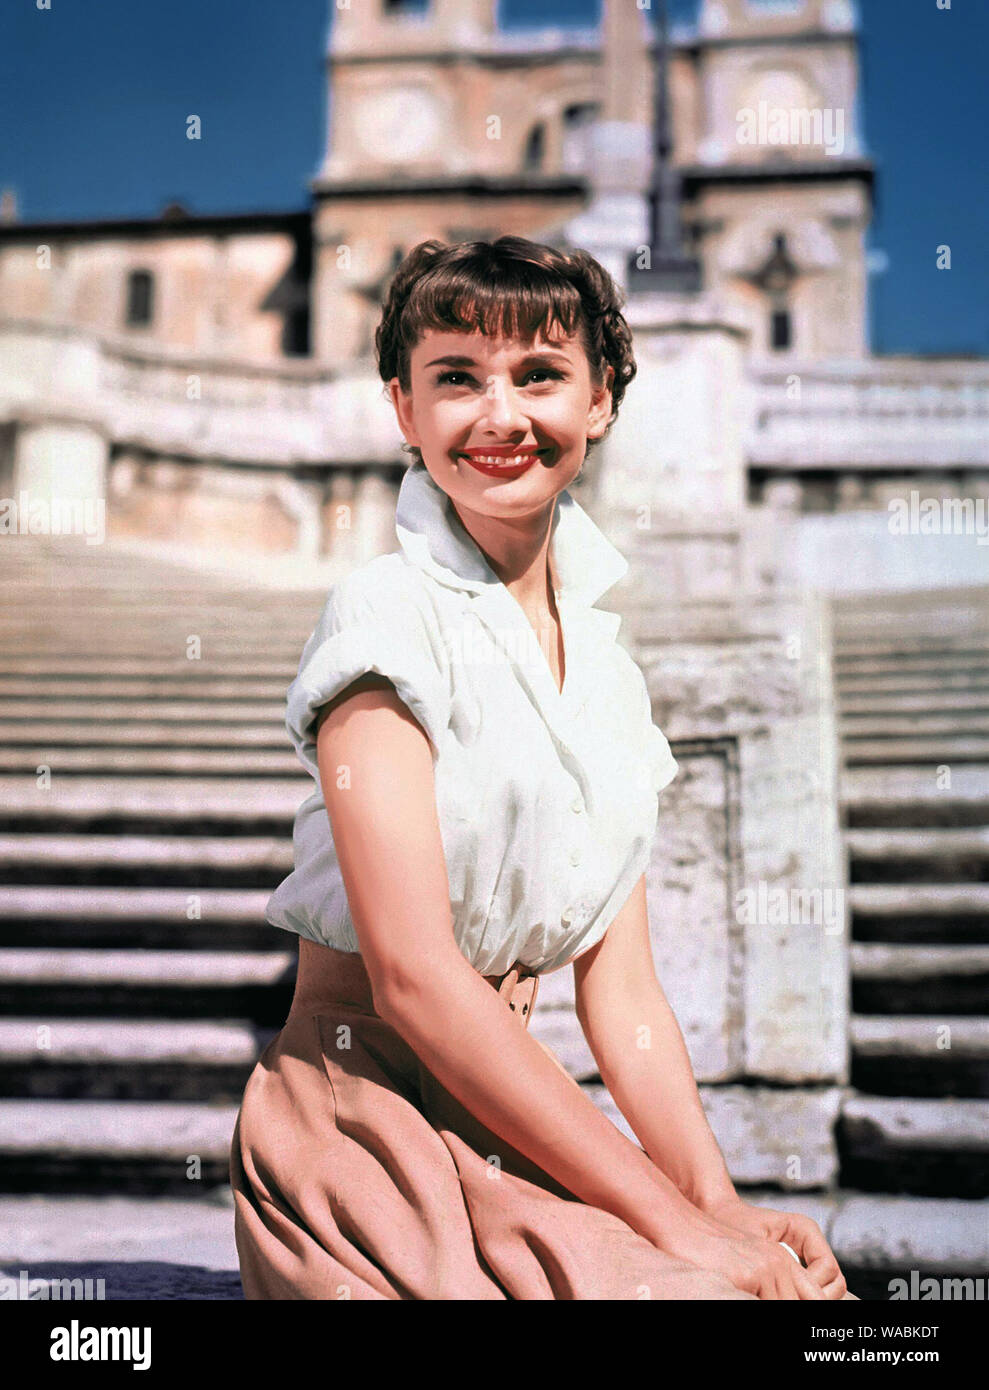 Audrey Hepburn, "Roman Holiday" (1953) Paramount Pictures File Reference #  33848-082THA Stock Photo - Alamy